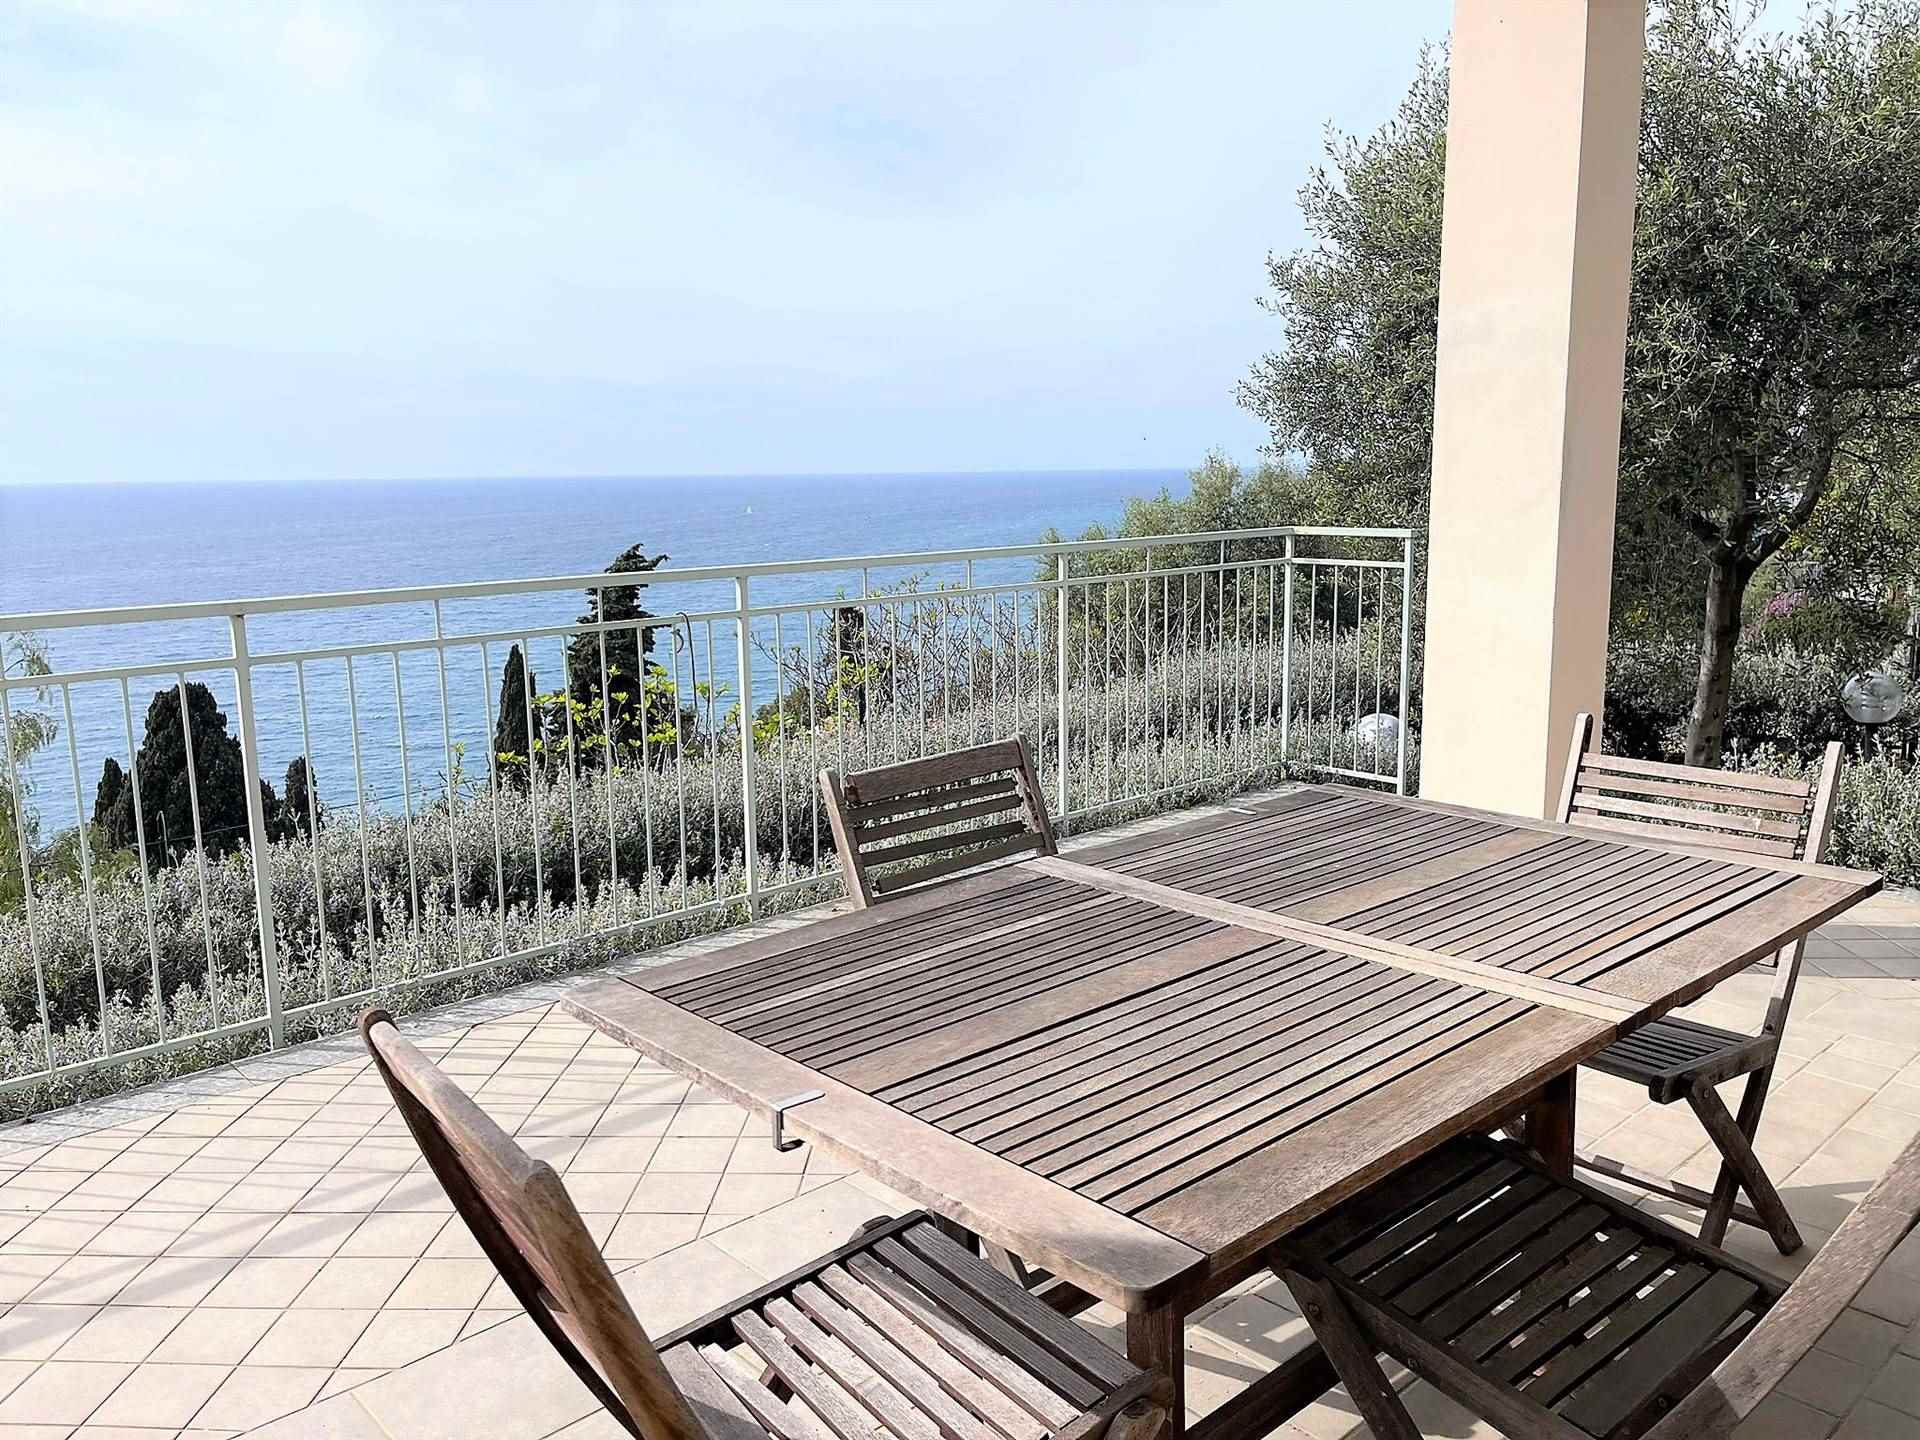 ONEGLIA PERIFERIA, IMPERIA, Apartment for sale of 94 Sq. mt., Excellent Condition, Heating Individual heating system, Energetic class: G, Epi: 250,15 